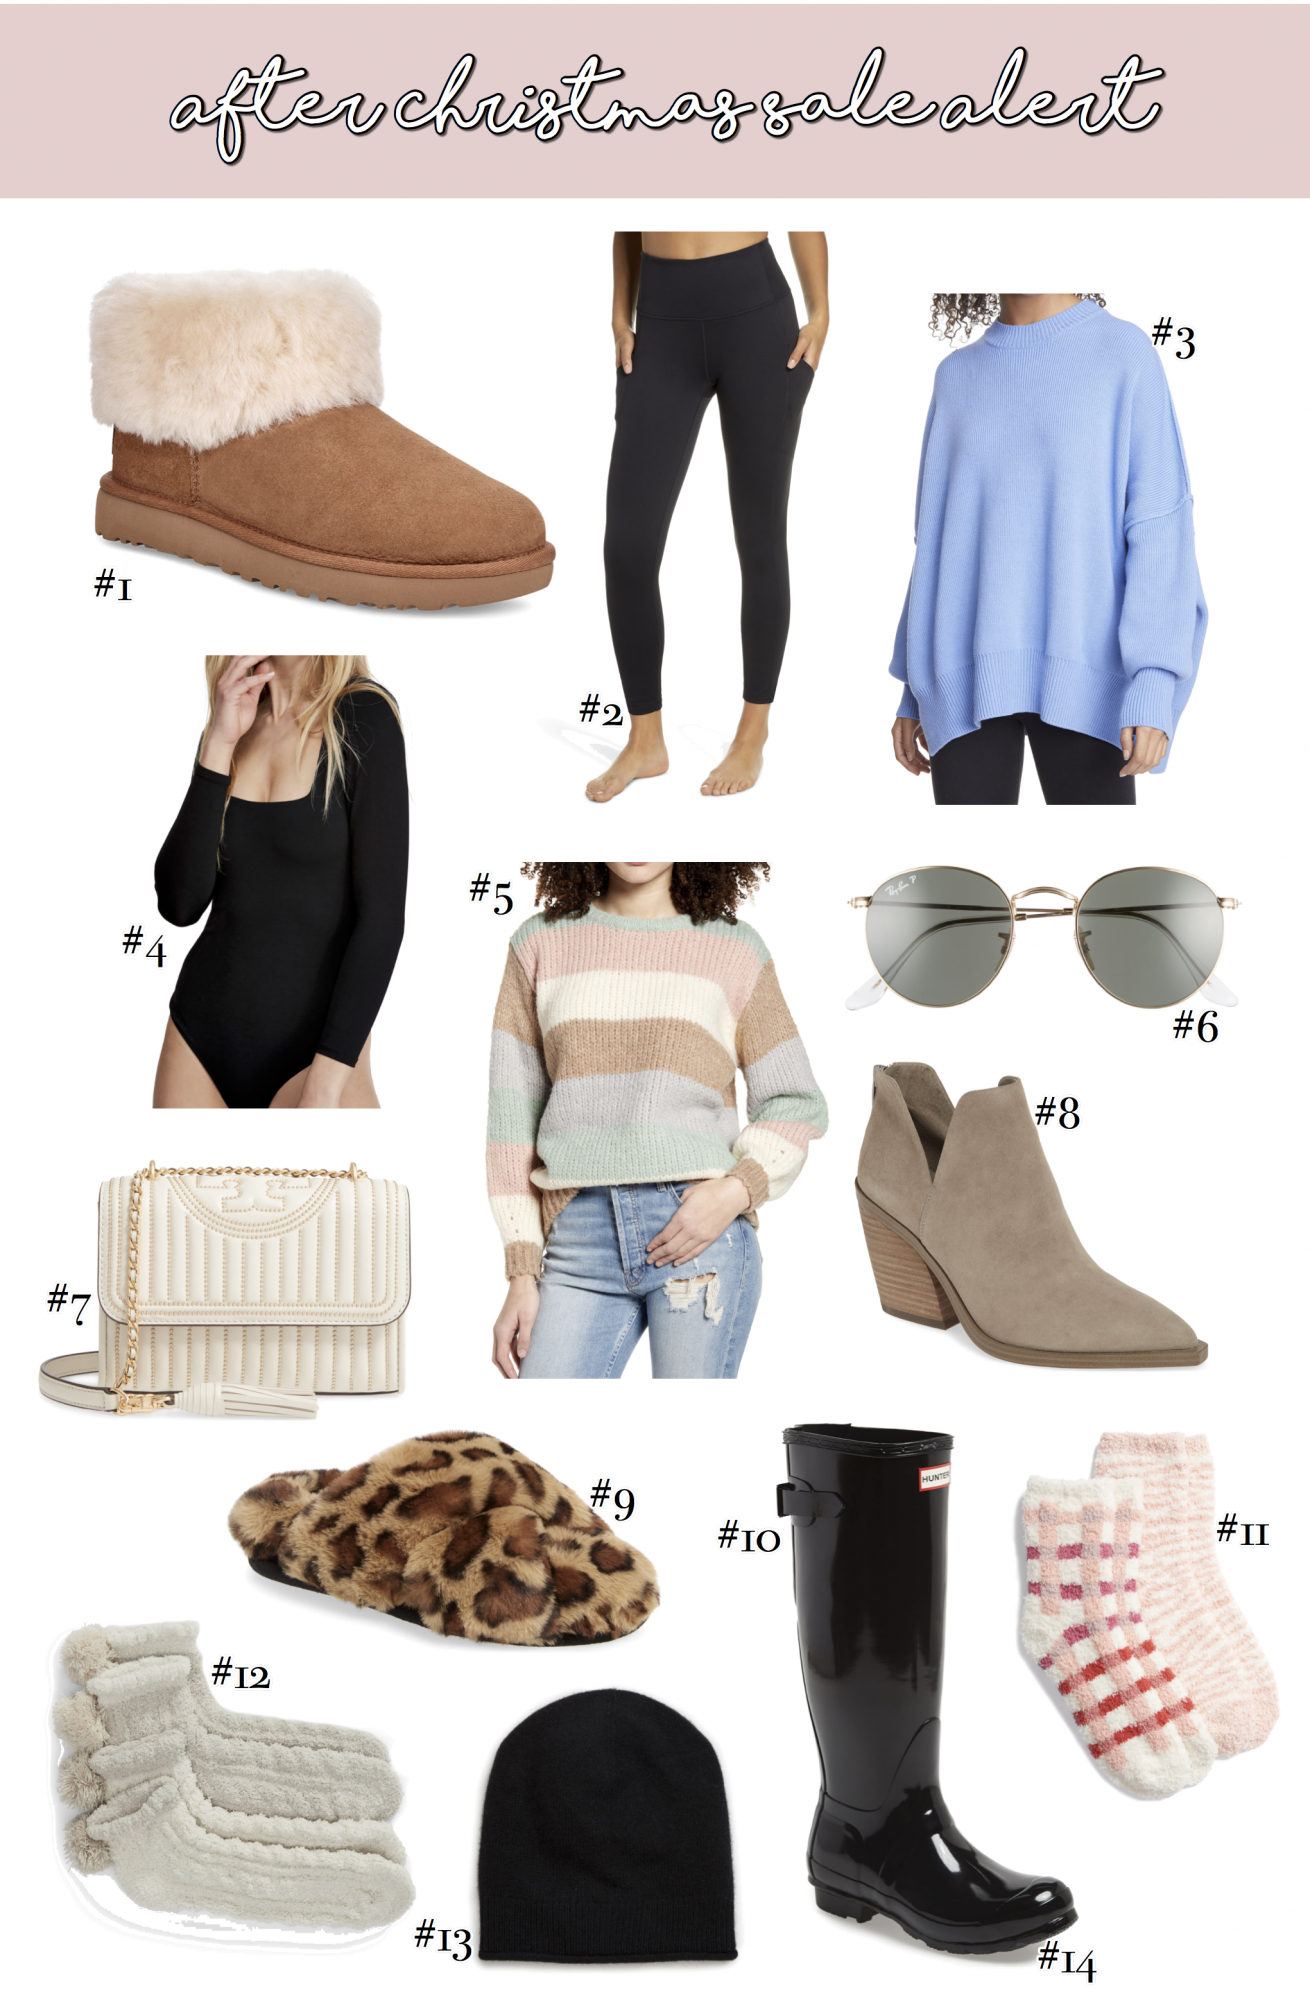 Best After Christmas Sales / Deals [40% Off!] by popular Oklahoma life and style blog, The Sweetest Thing: collage image of Ugg boots, Zella leggings, oversized Free People sweater, Hunter rain boots, Ray-Ban sunglasses, Free People bodysuit, Tory Burch crossbody bag, cahmere beanie, fuzzy leopard print slippers, stripe sweater, taupe suede ankle boots, and fuzzy pom socks. 